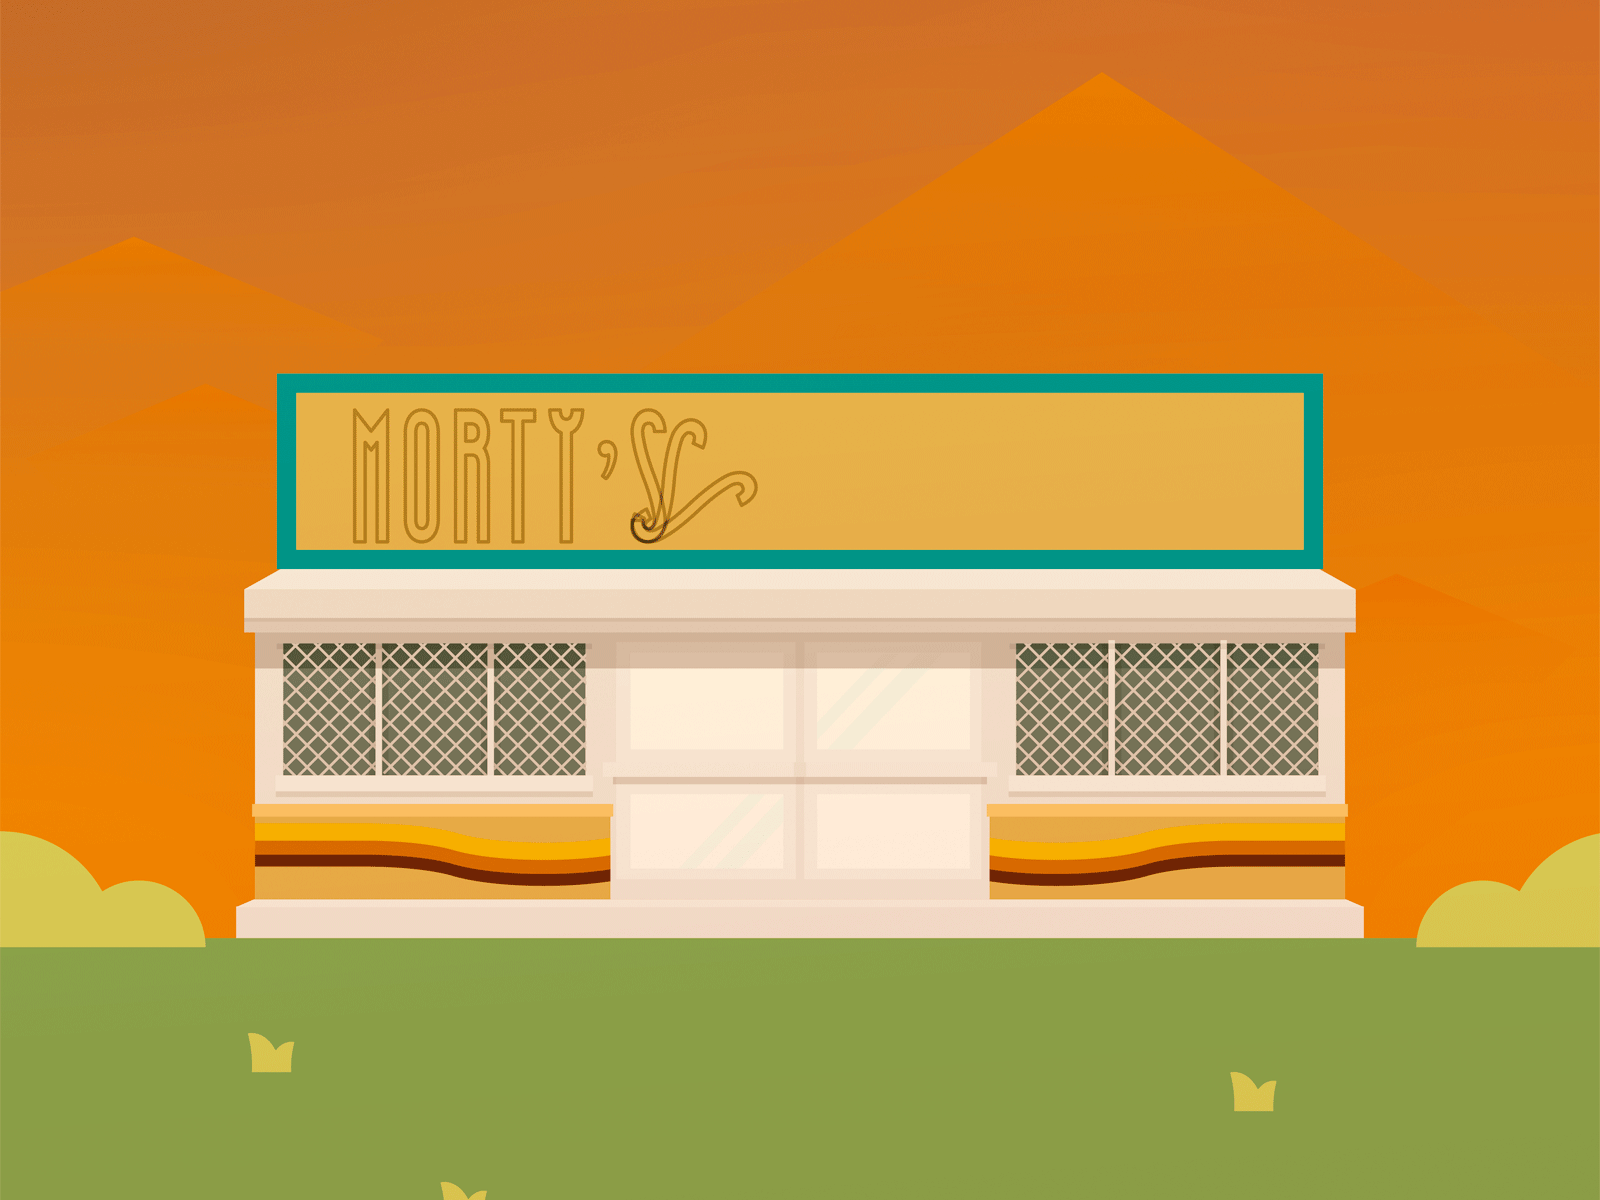 Morty's Storefront